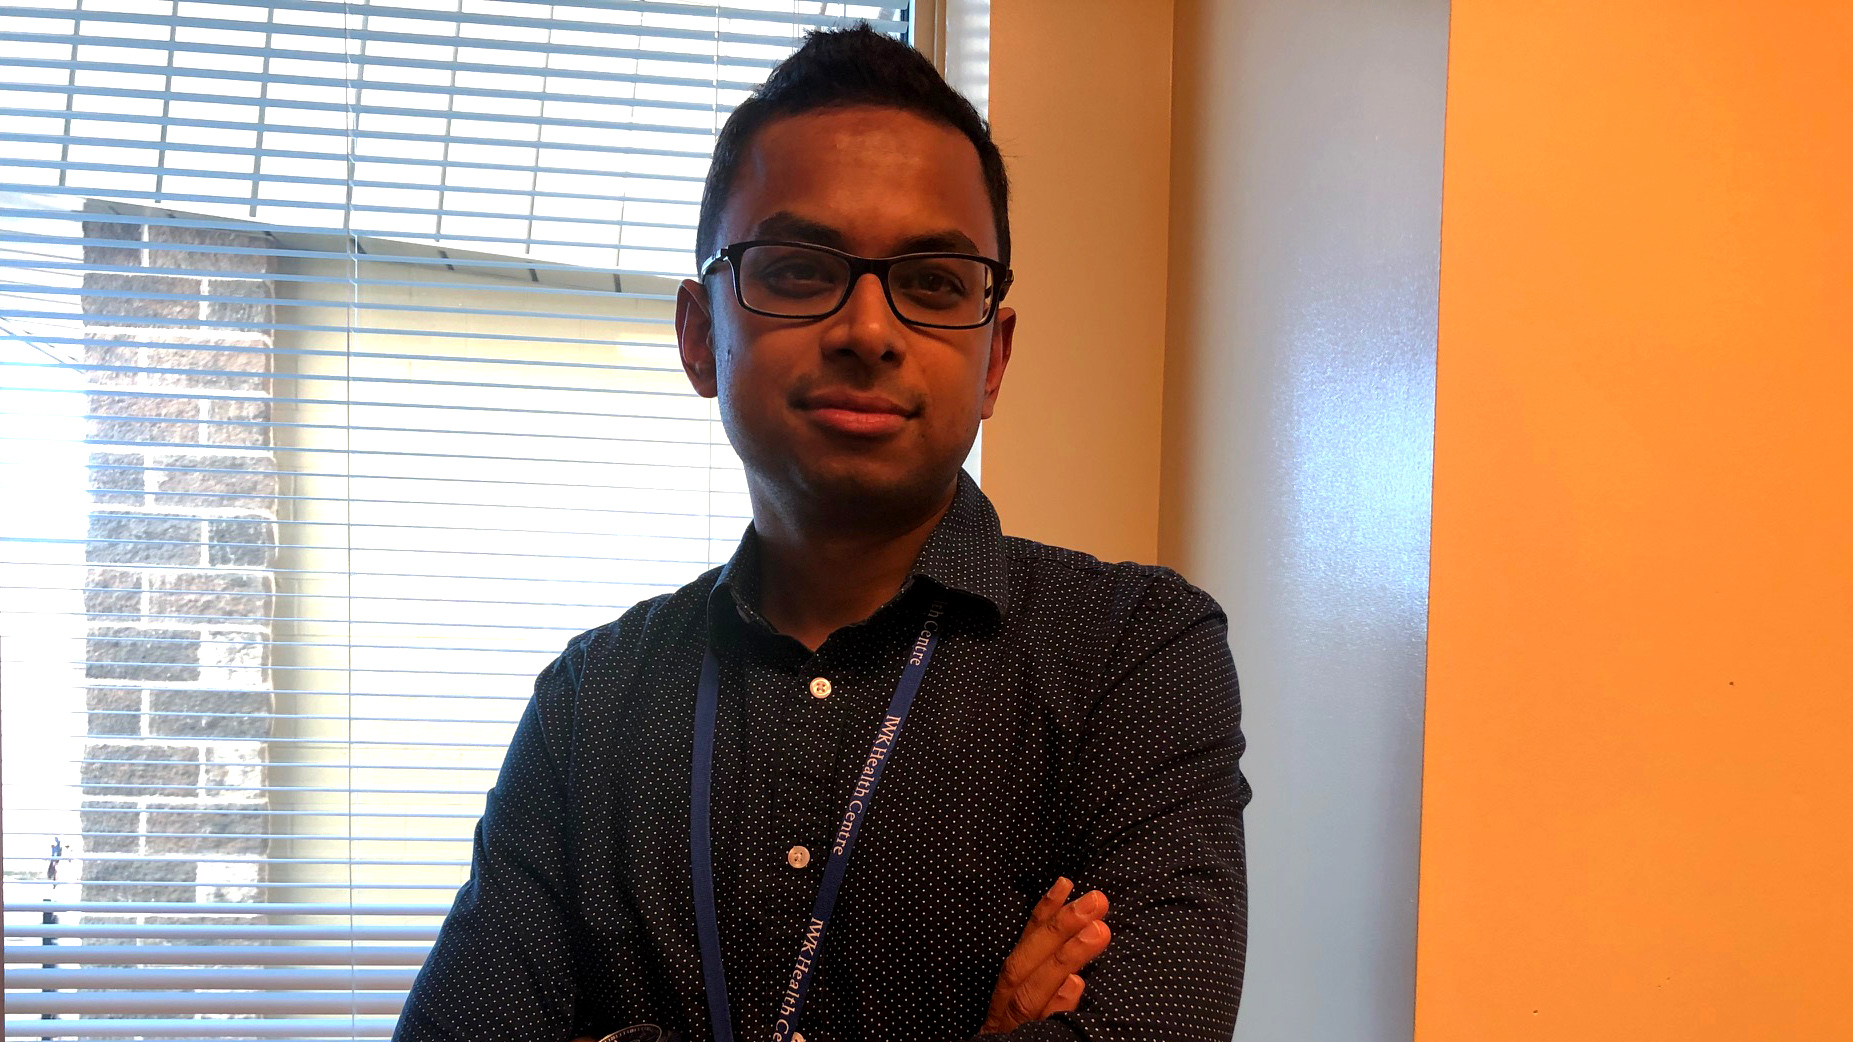 Dr. Souvik Mitra is a neonatologist at the IWK Health Centre.